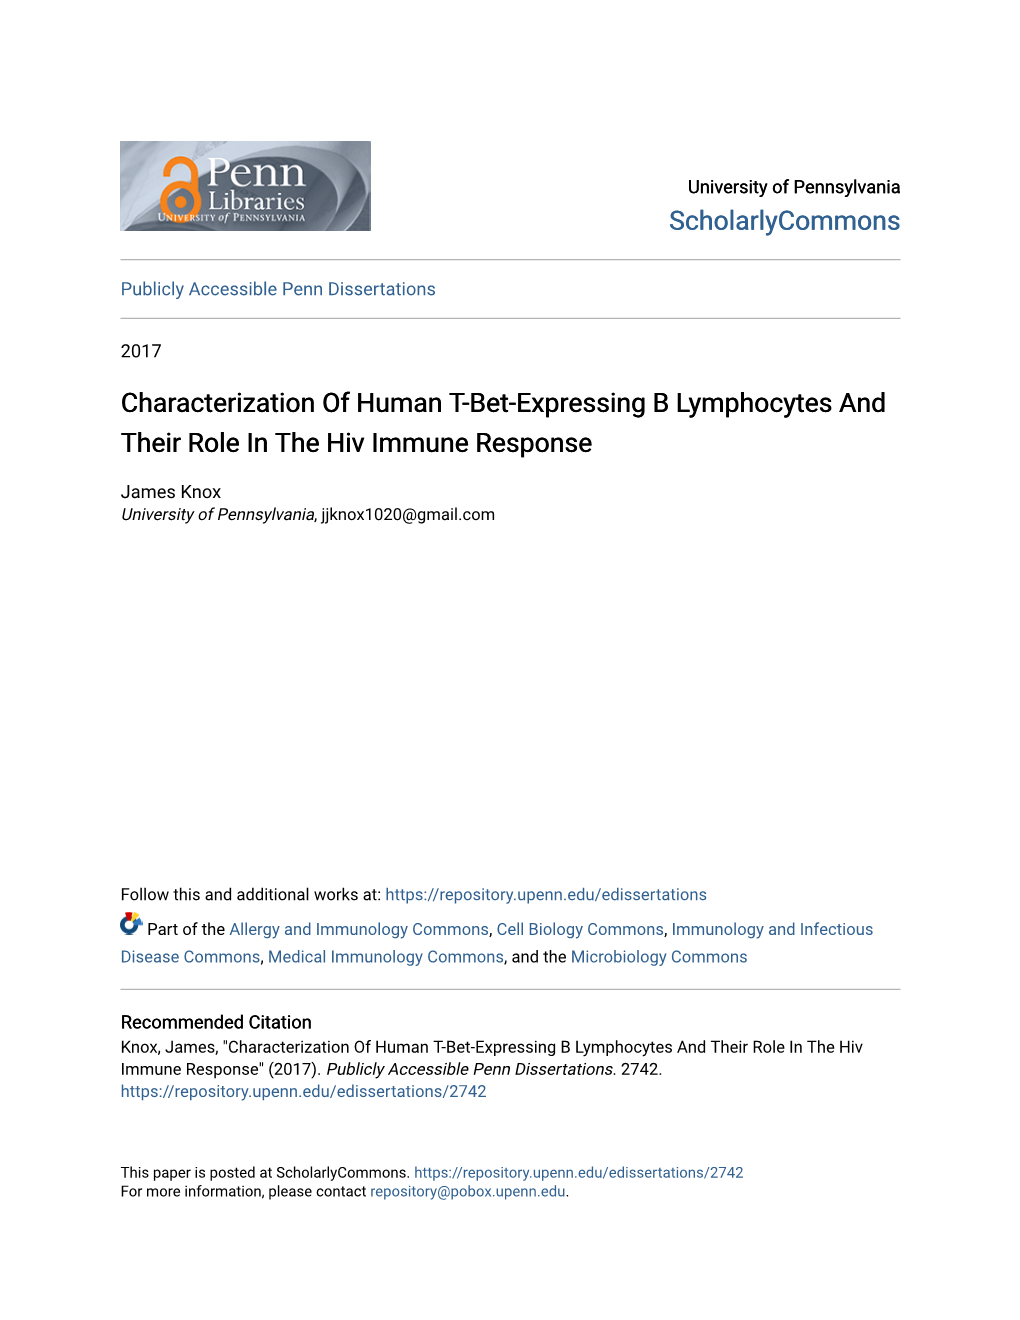 Characterization of Human T-Bet-Expressing B Lymphocytes and Their Role in the Hiv Immune Response